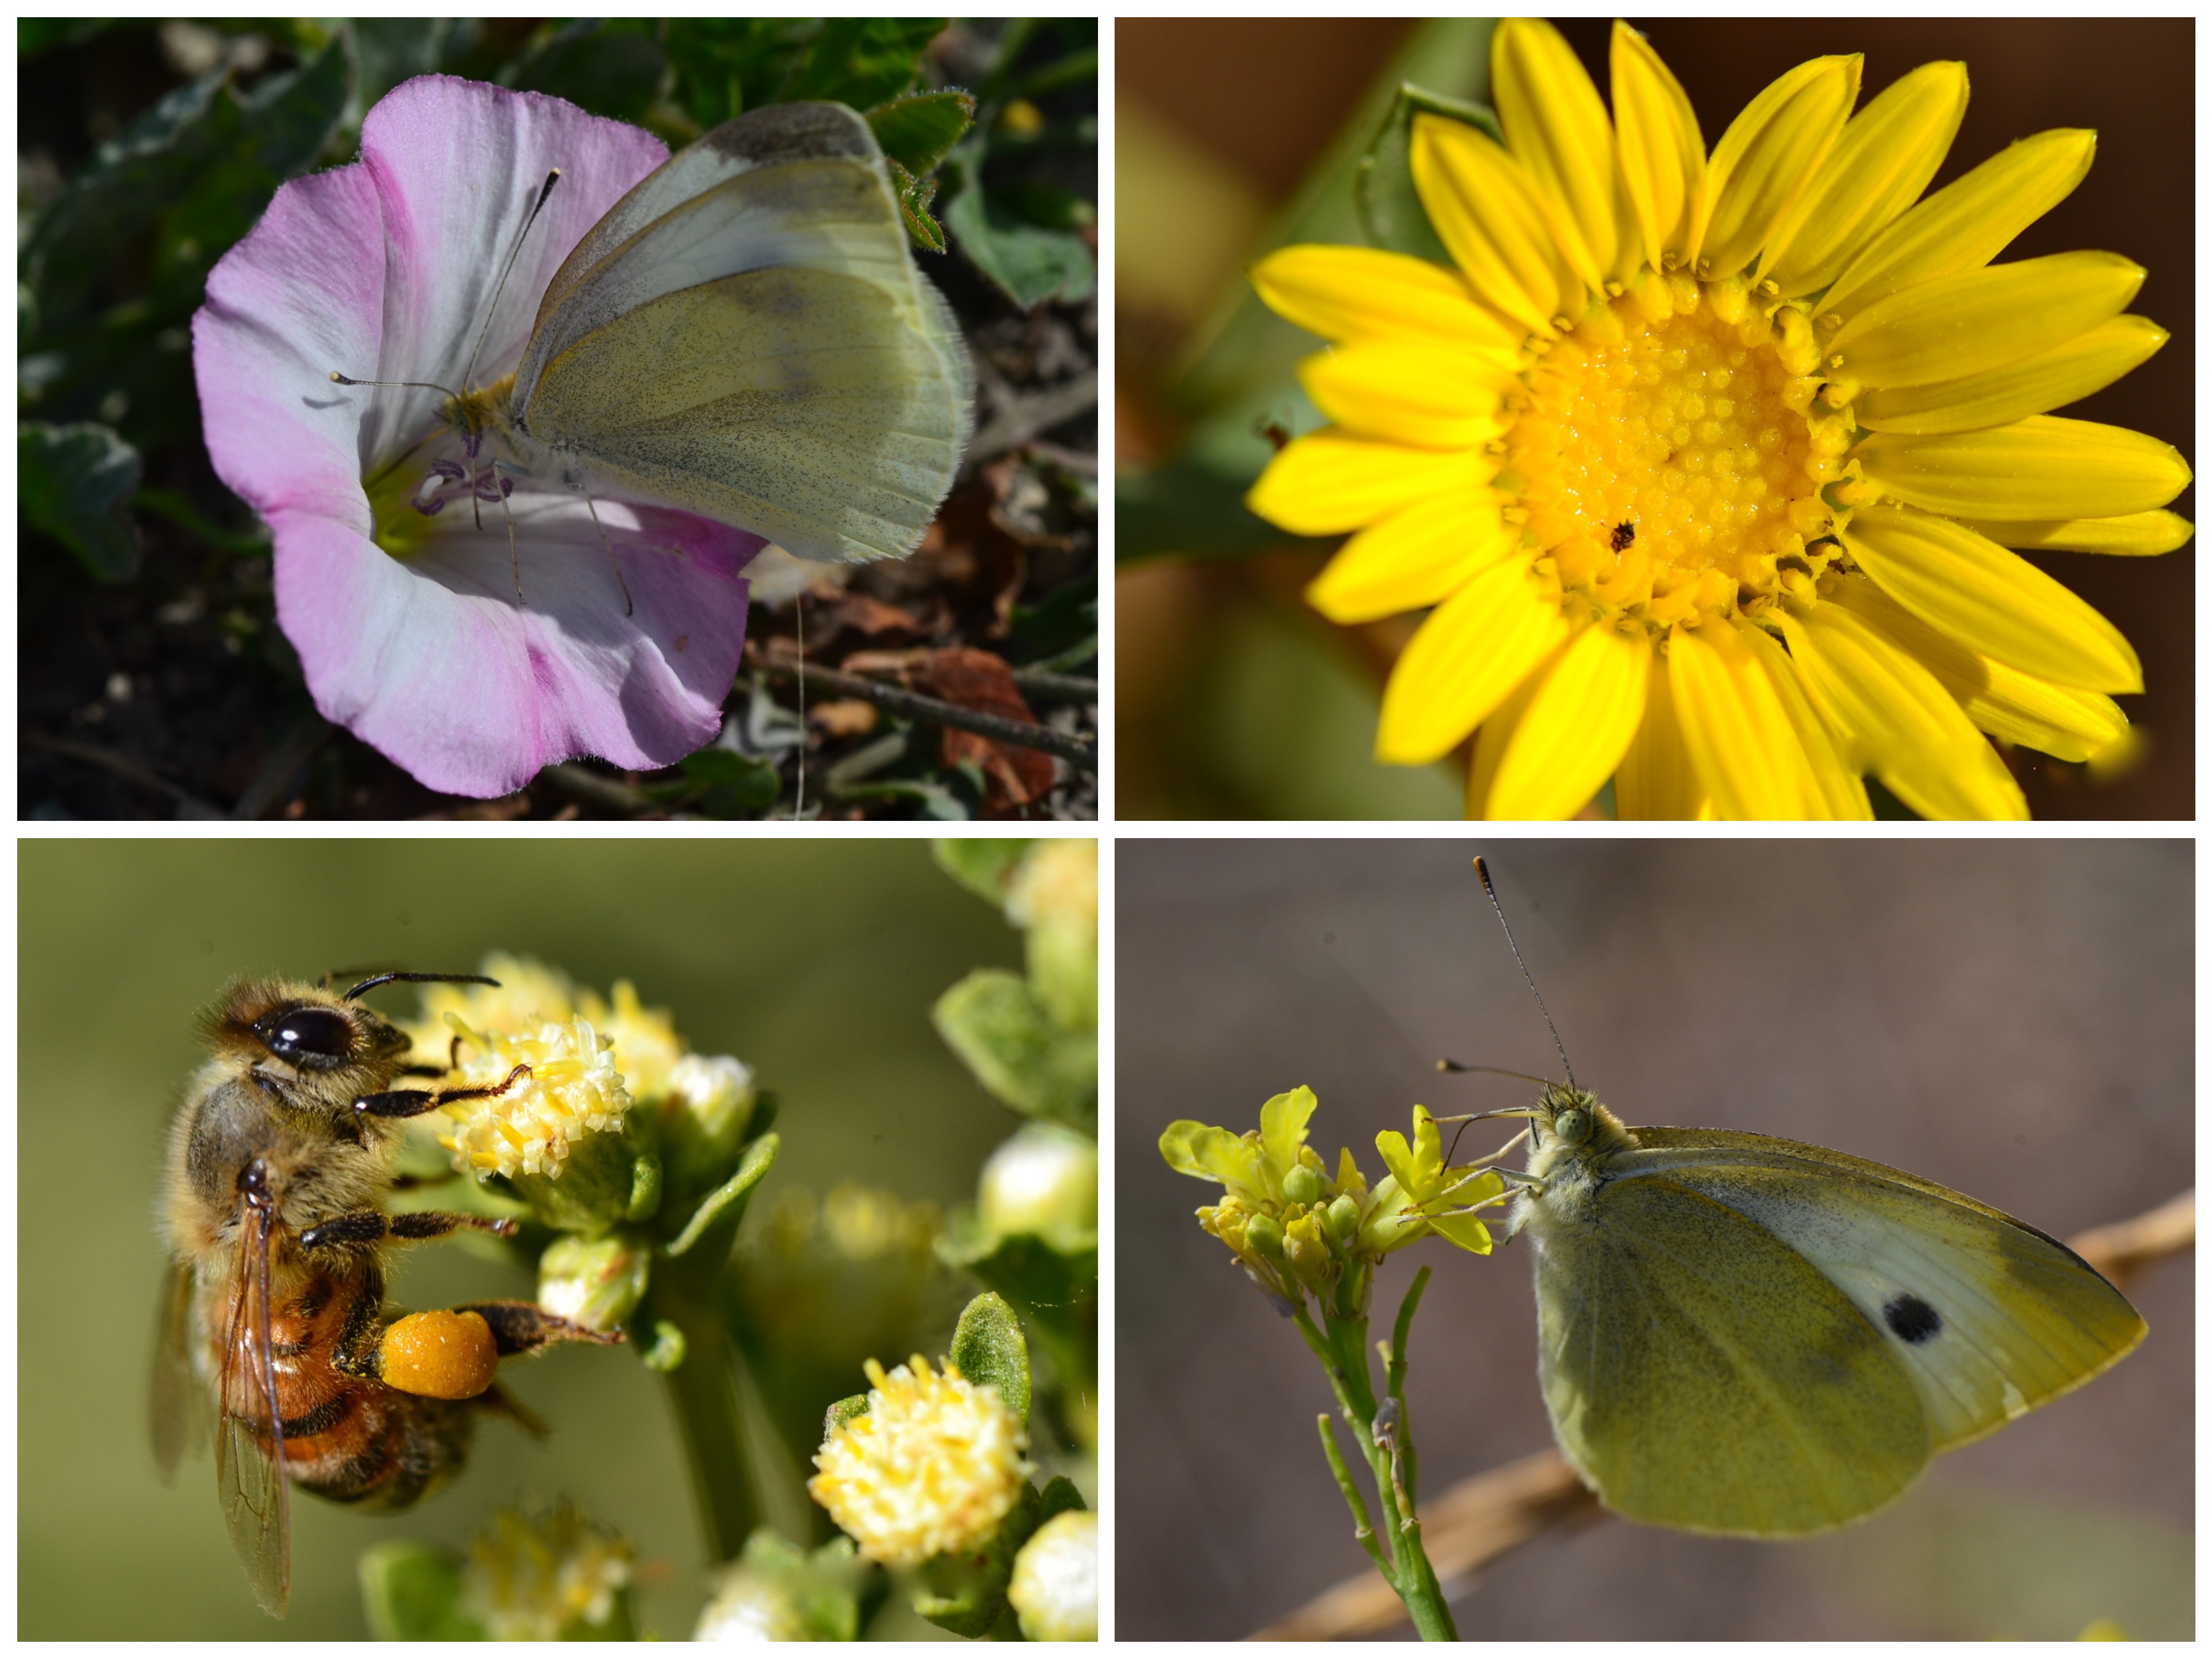 collage of four images displaying a close-ups of a bee, insects, and a variety of flowers and vegetation